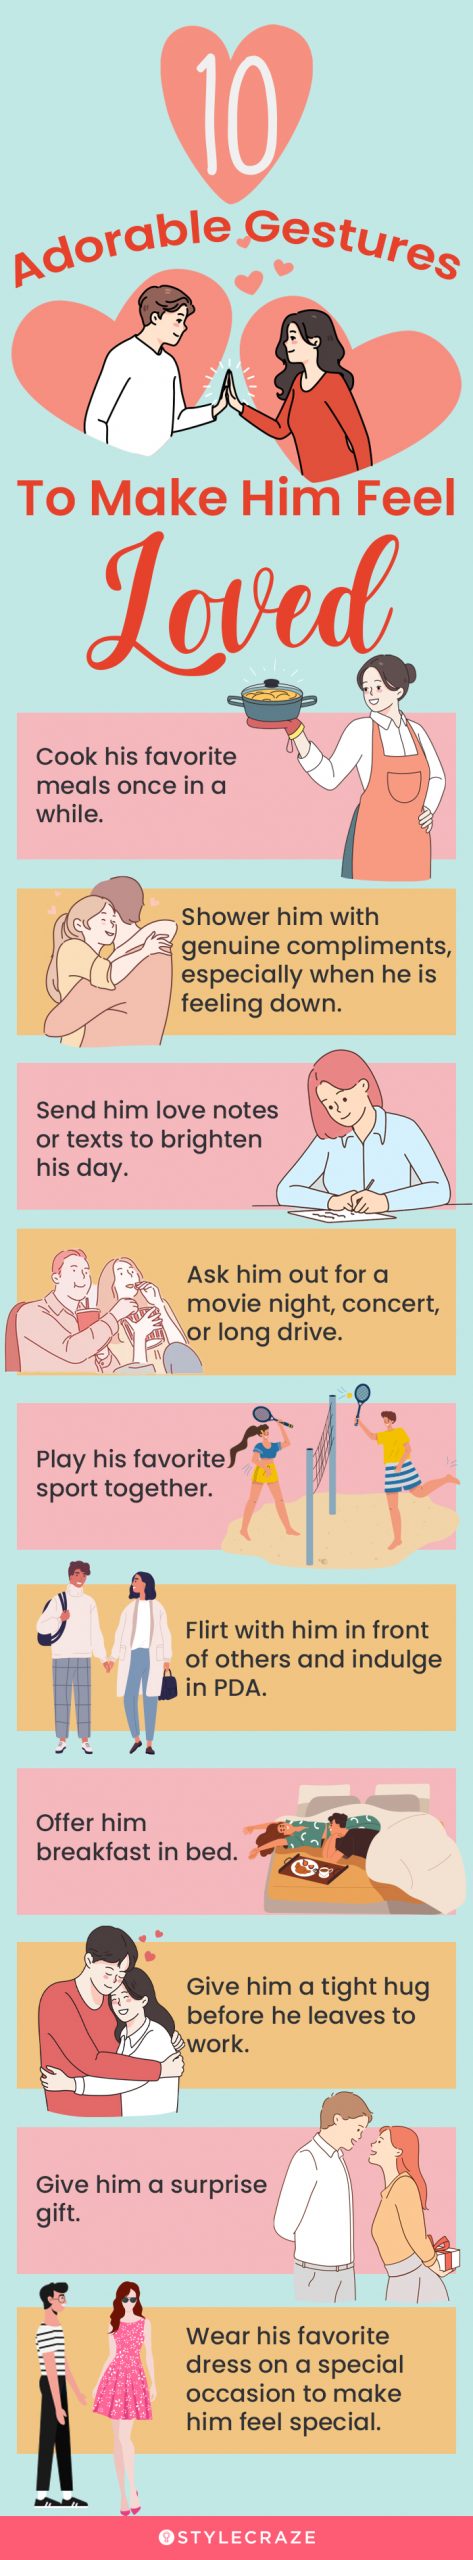 10 adorable gestures to make him feel loved (infographic)